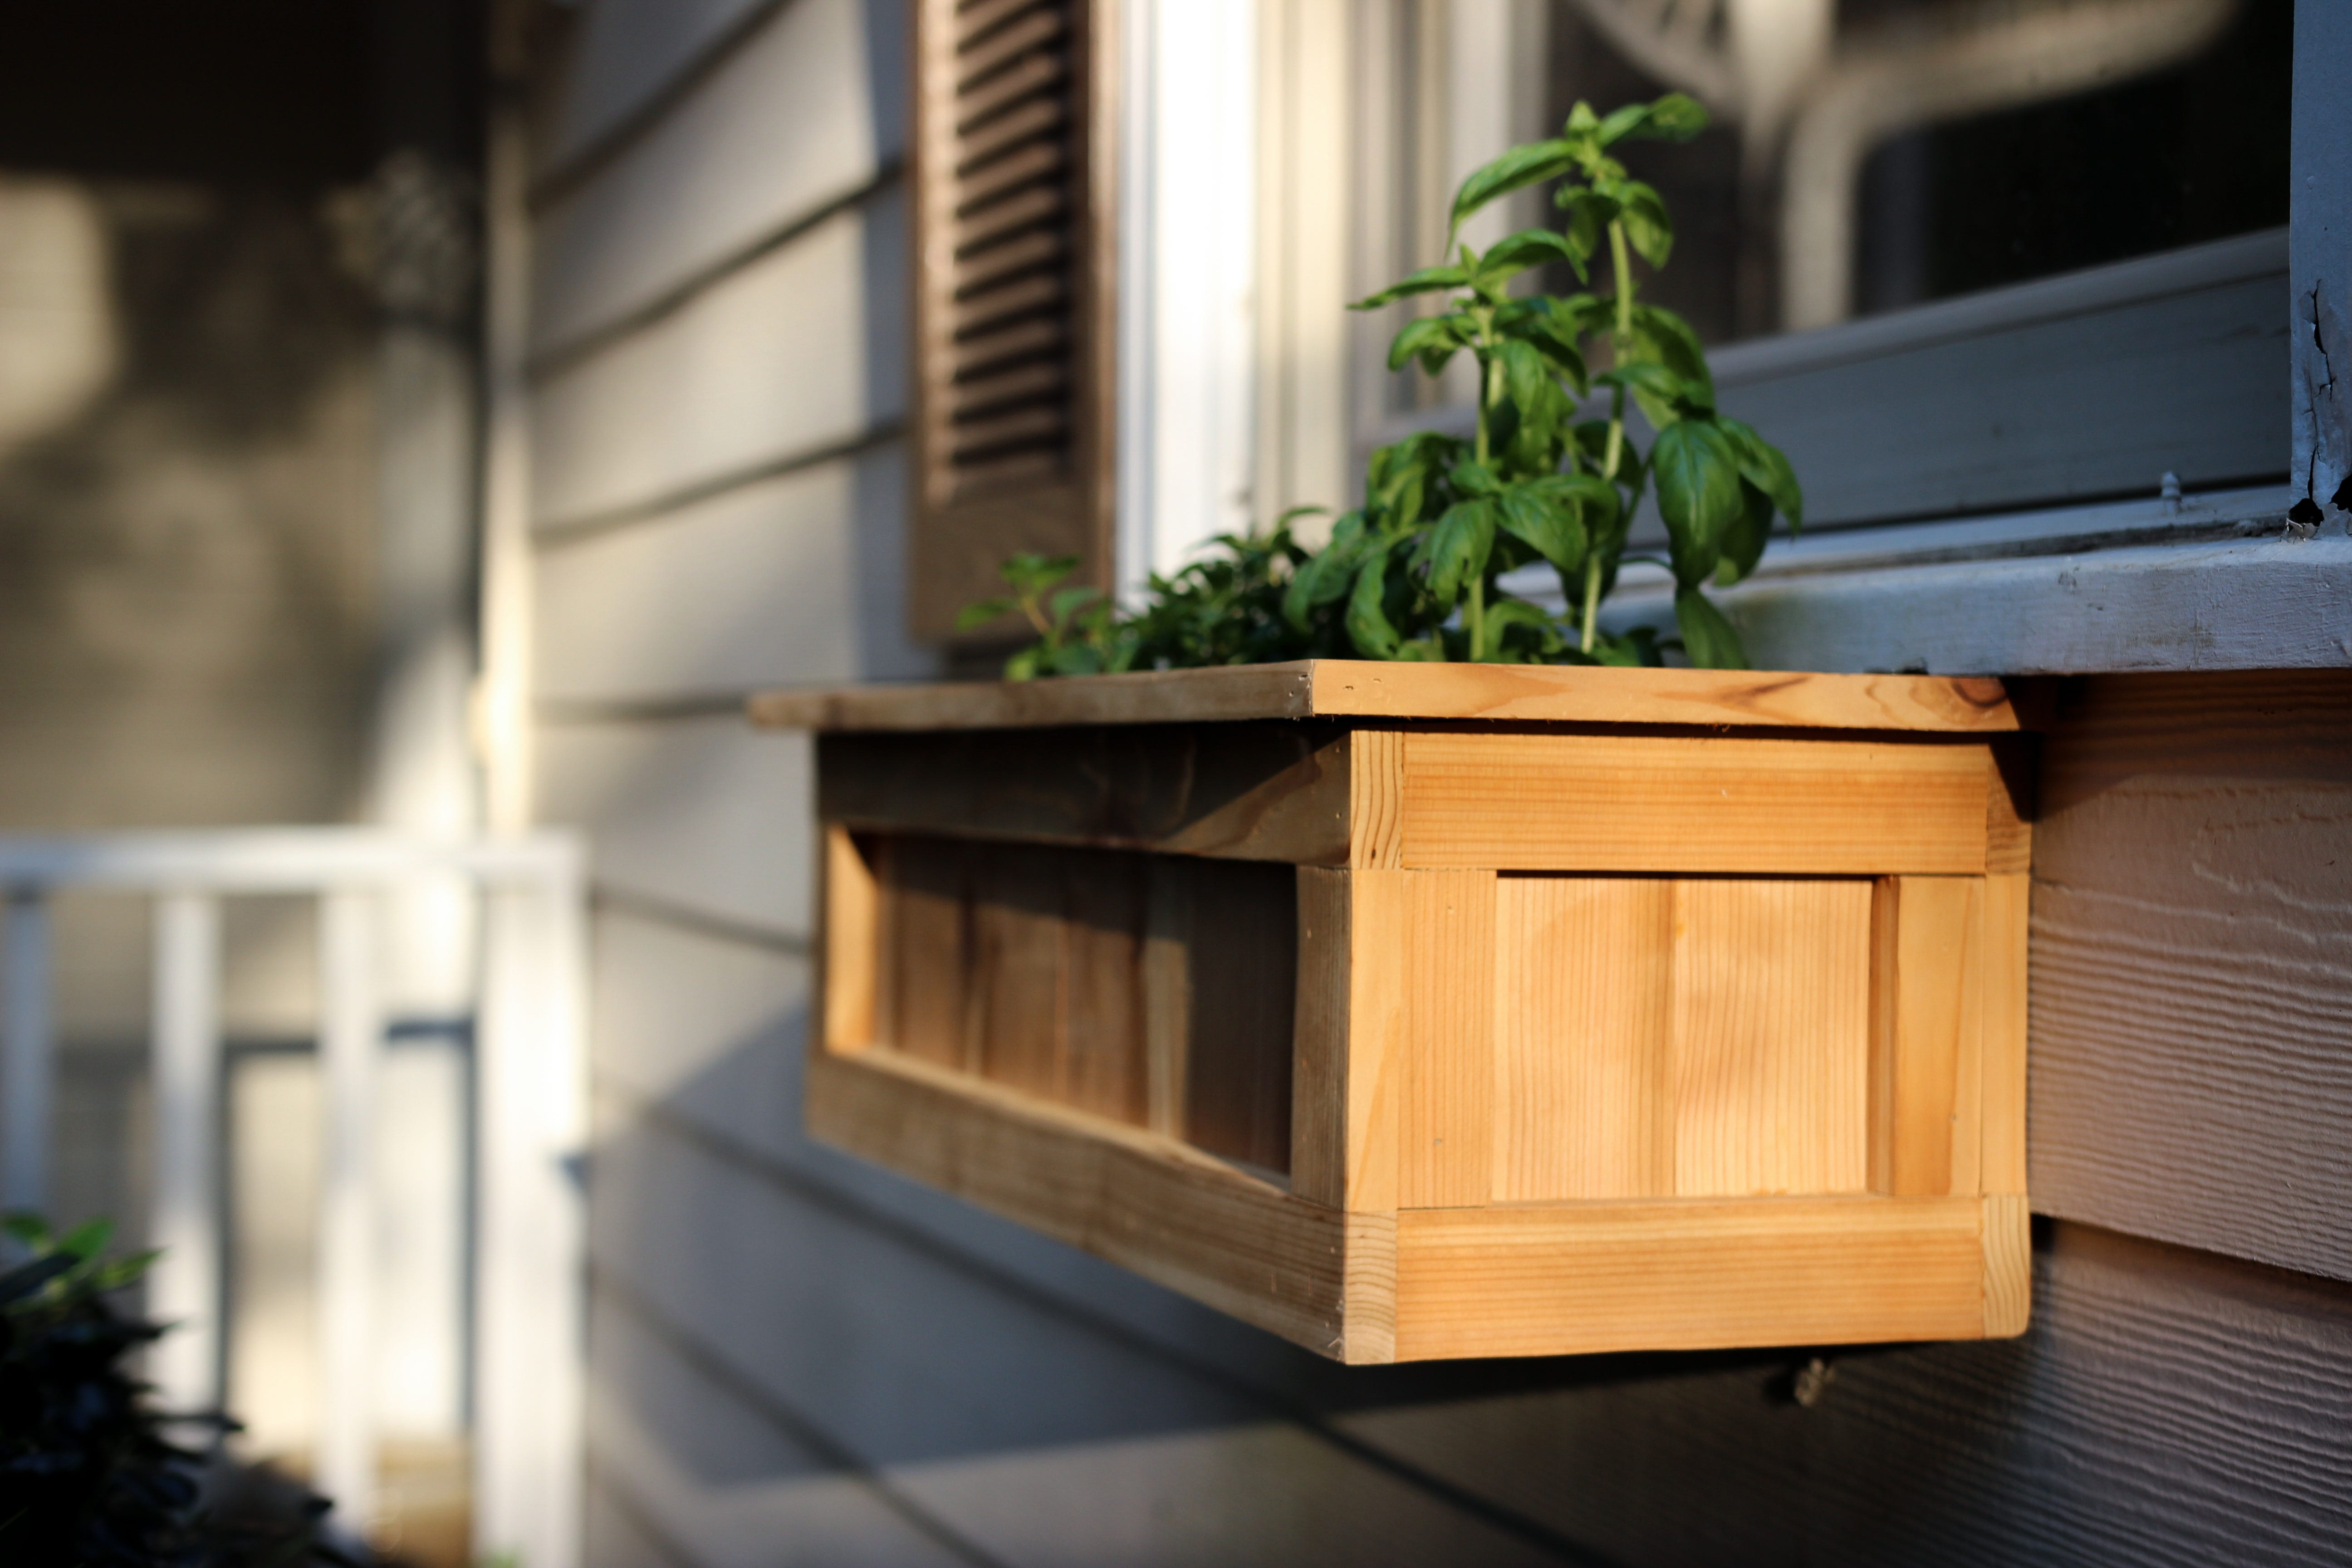 How to Build a Window Planter Box From Cedar - Make or ...